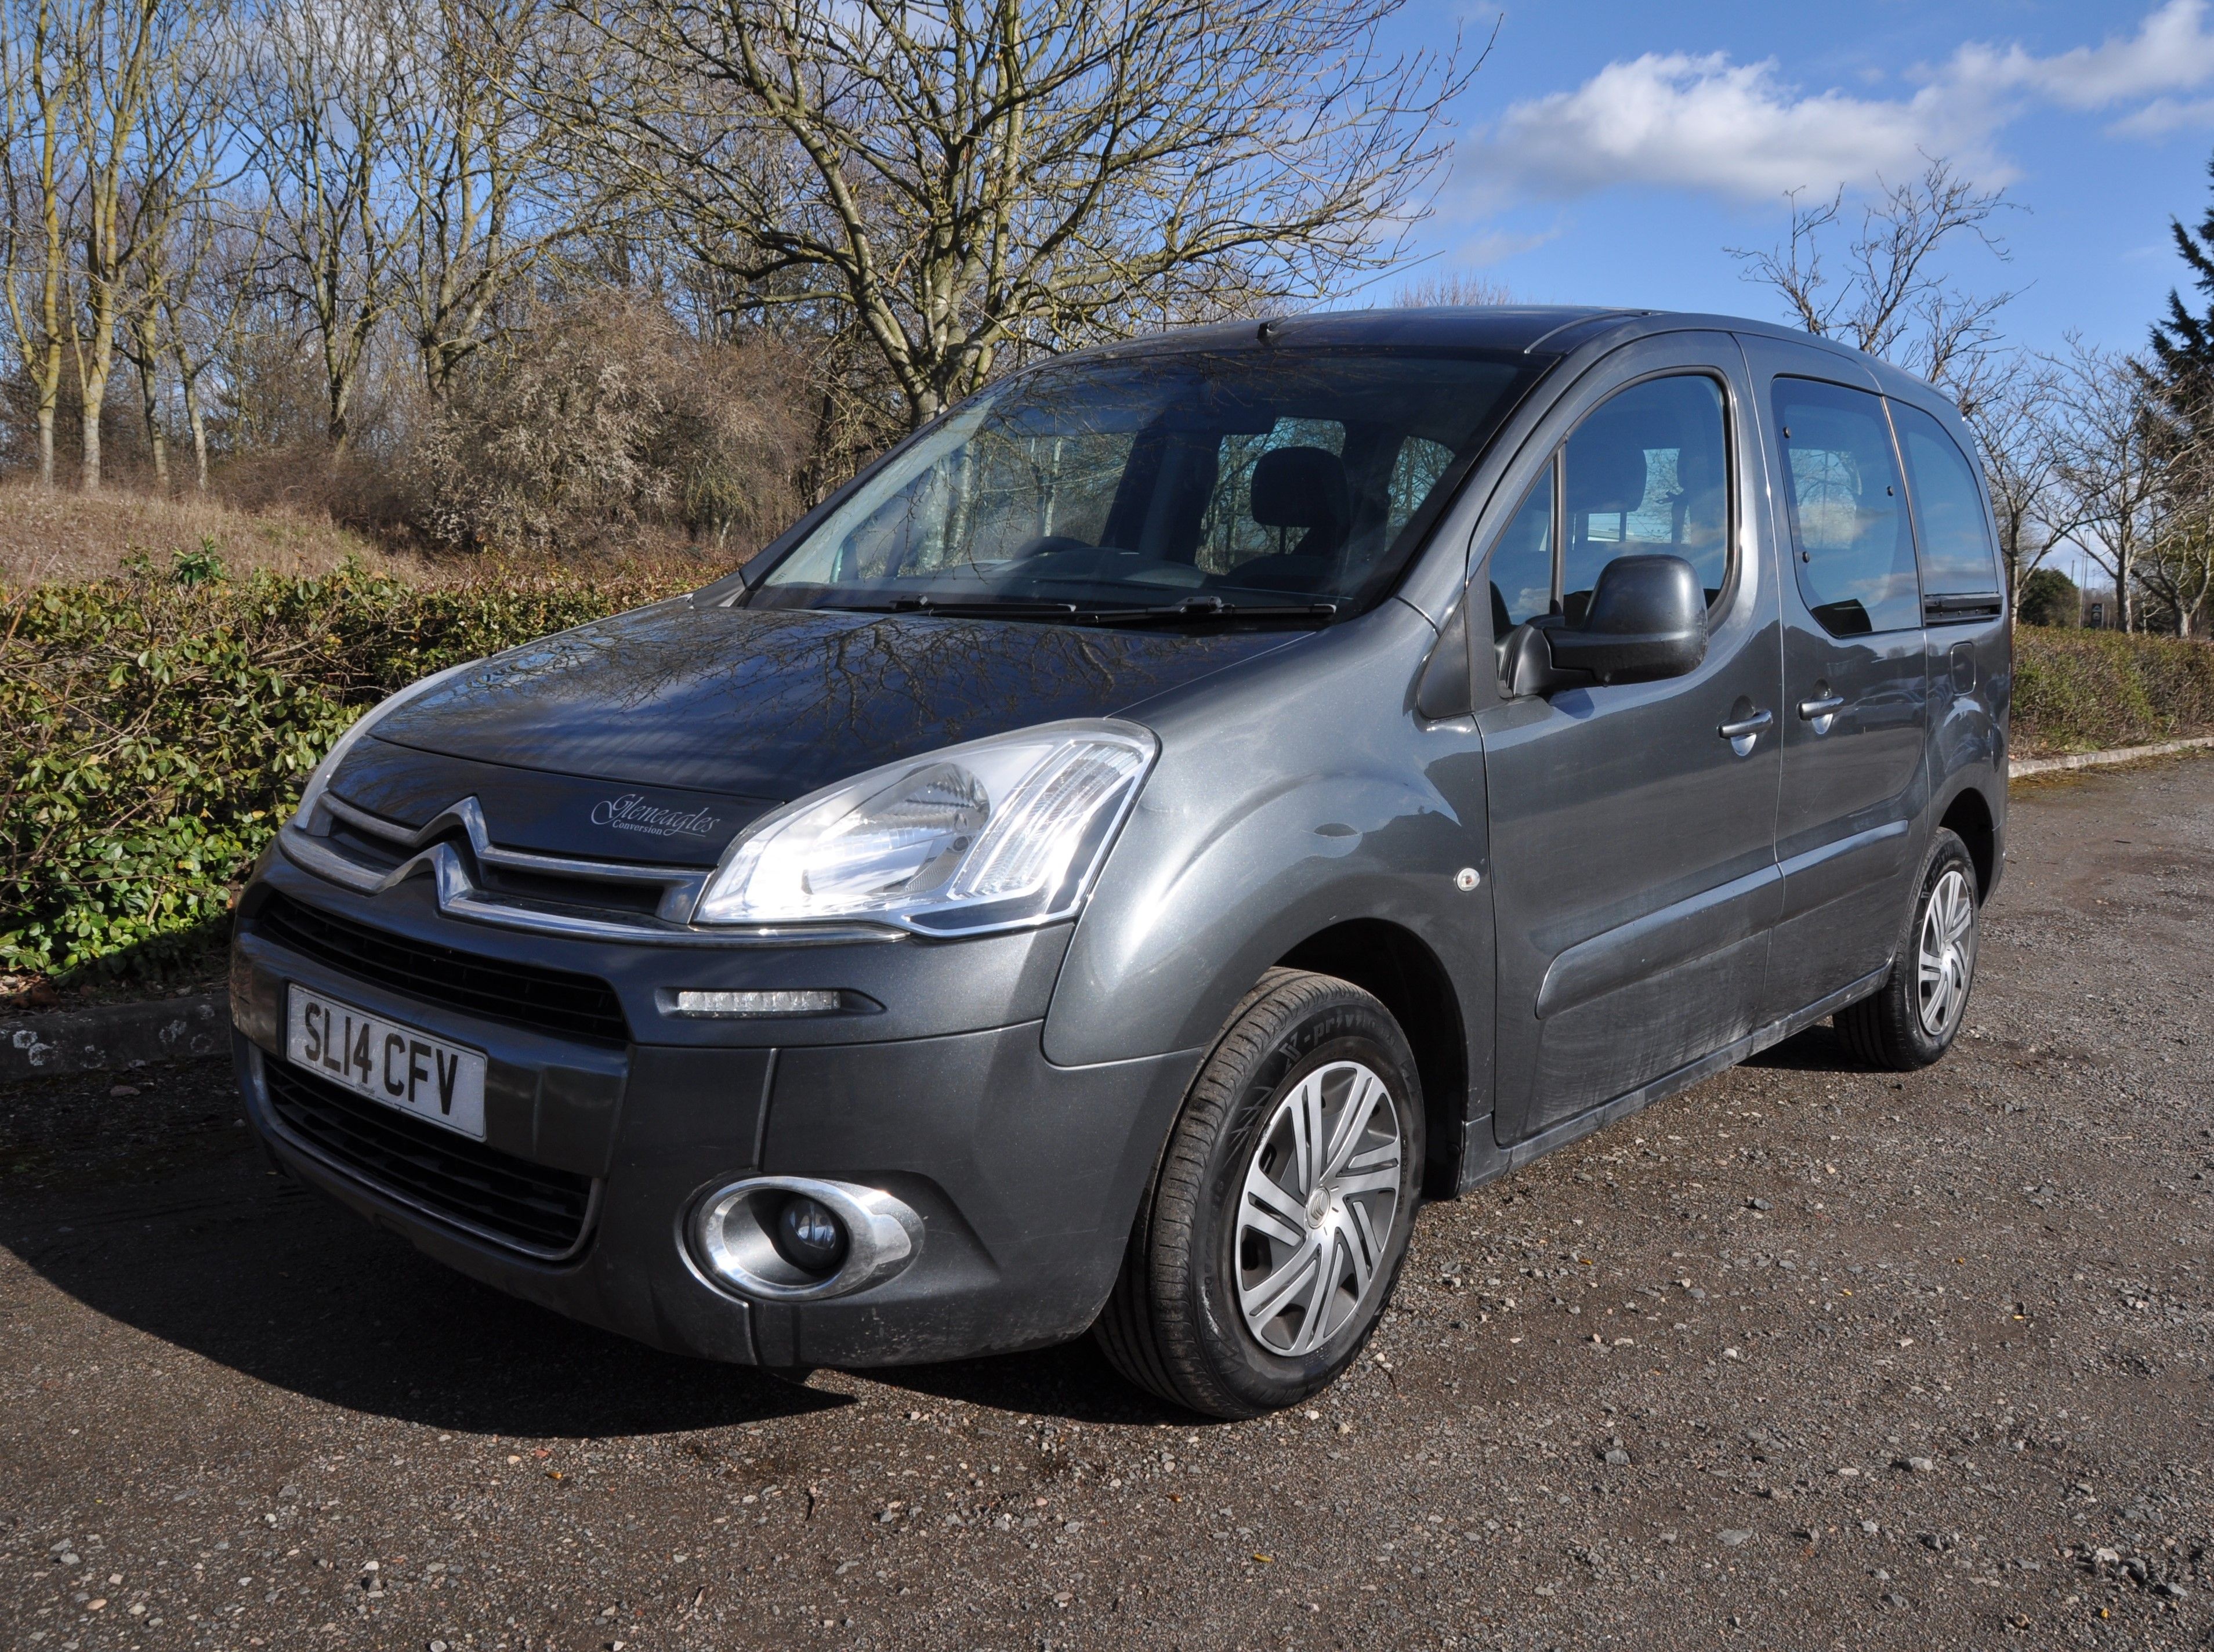 A 2014 CITROEN BERLINGO MULTISPACE GLENEAGLES CONVERSION in grey with two front and one rear seat